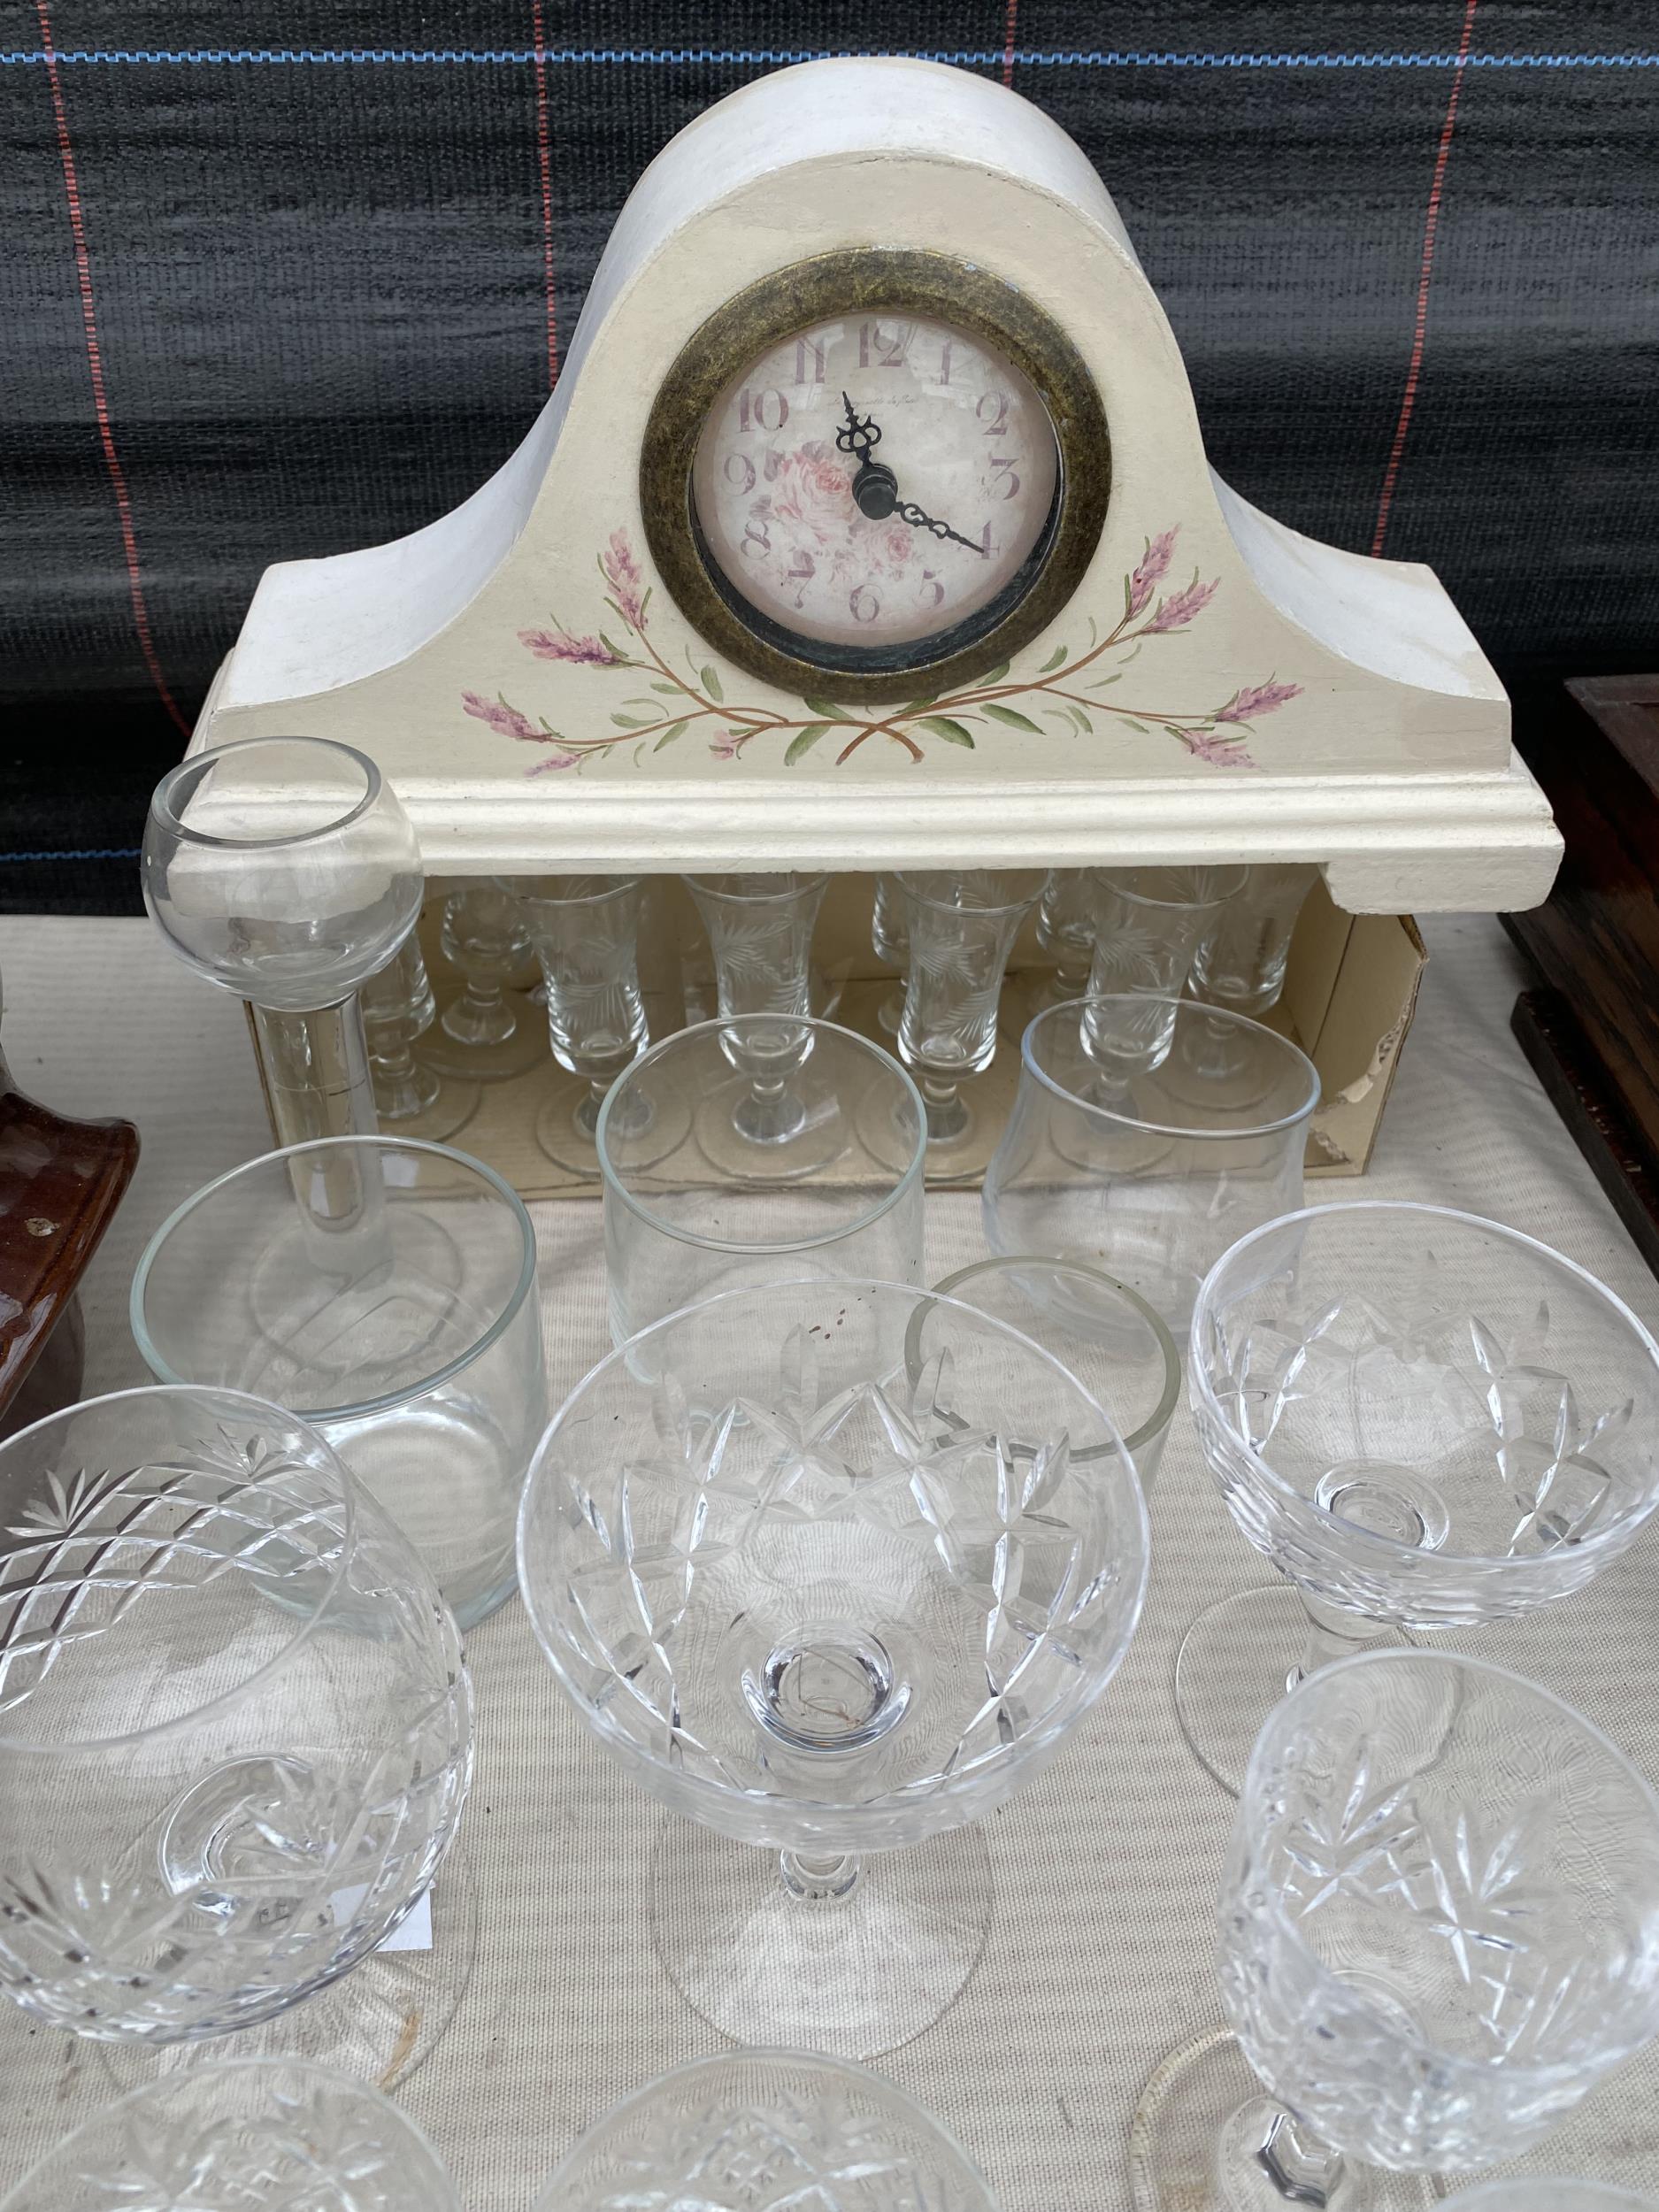 AN ASSORTMENT OF GLASS WARE AND A MANTLE CLOCK - Image 2 of 2